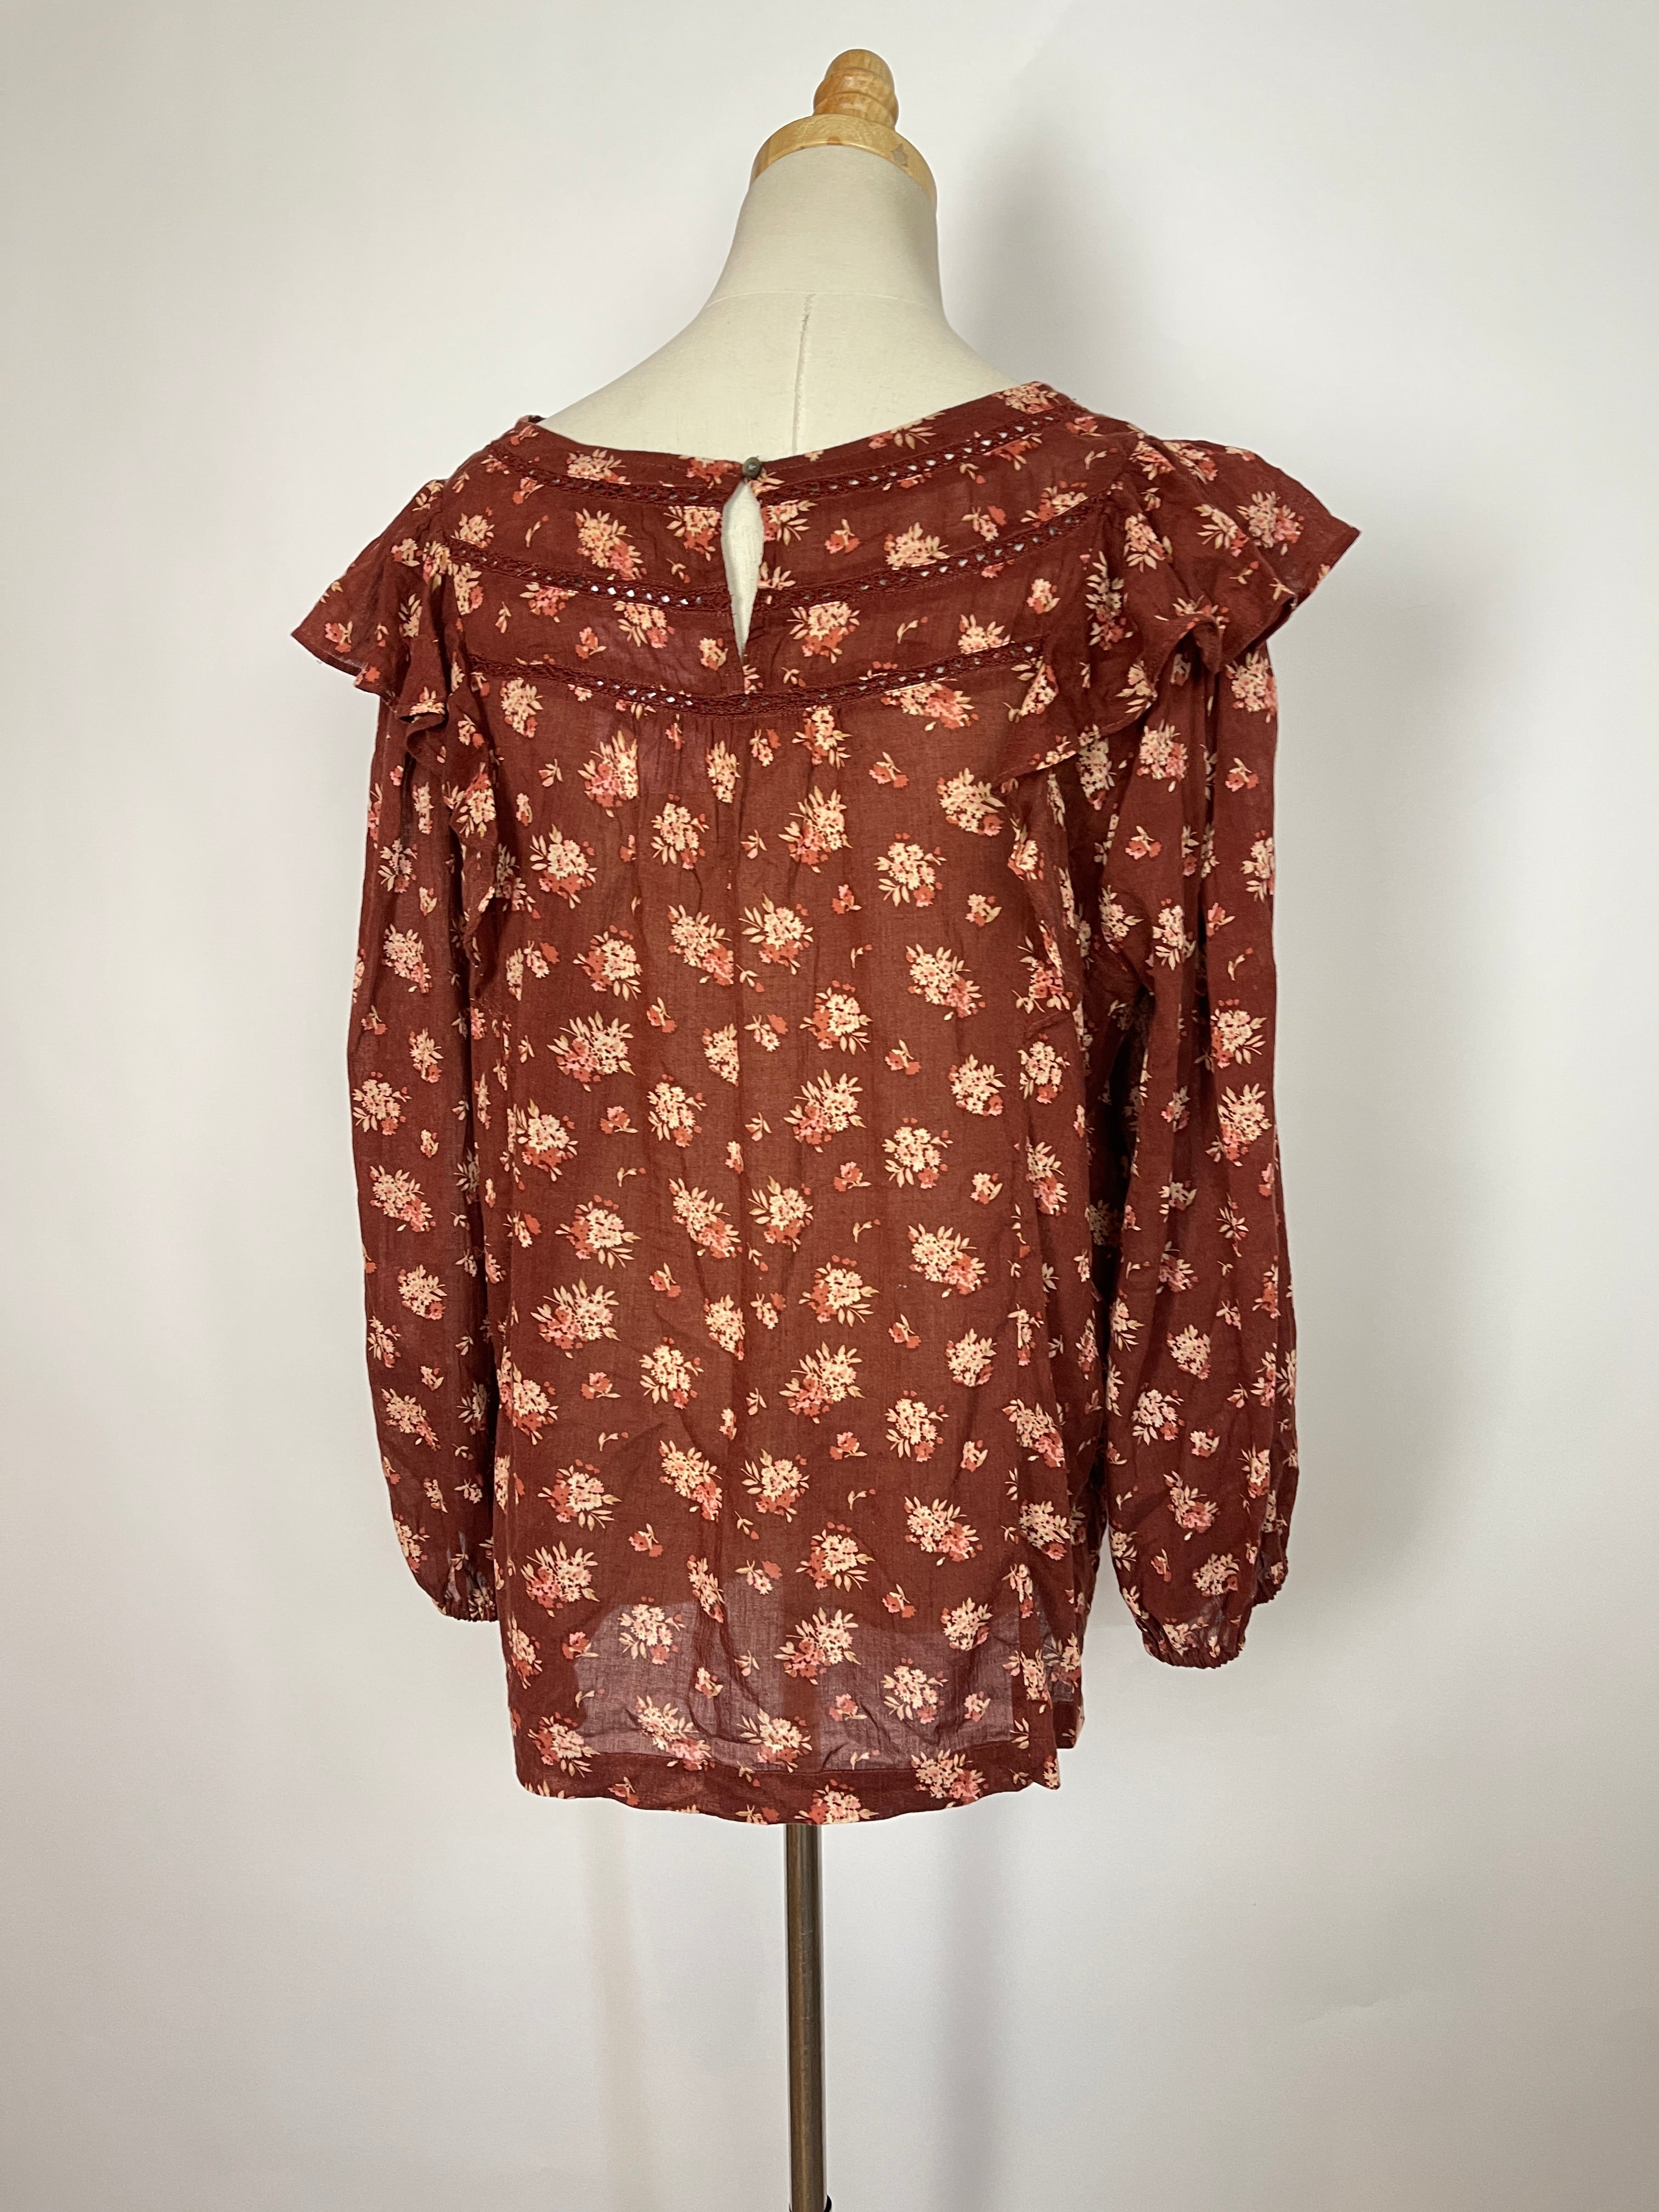 Madewell Floral Blouse (XL)